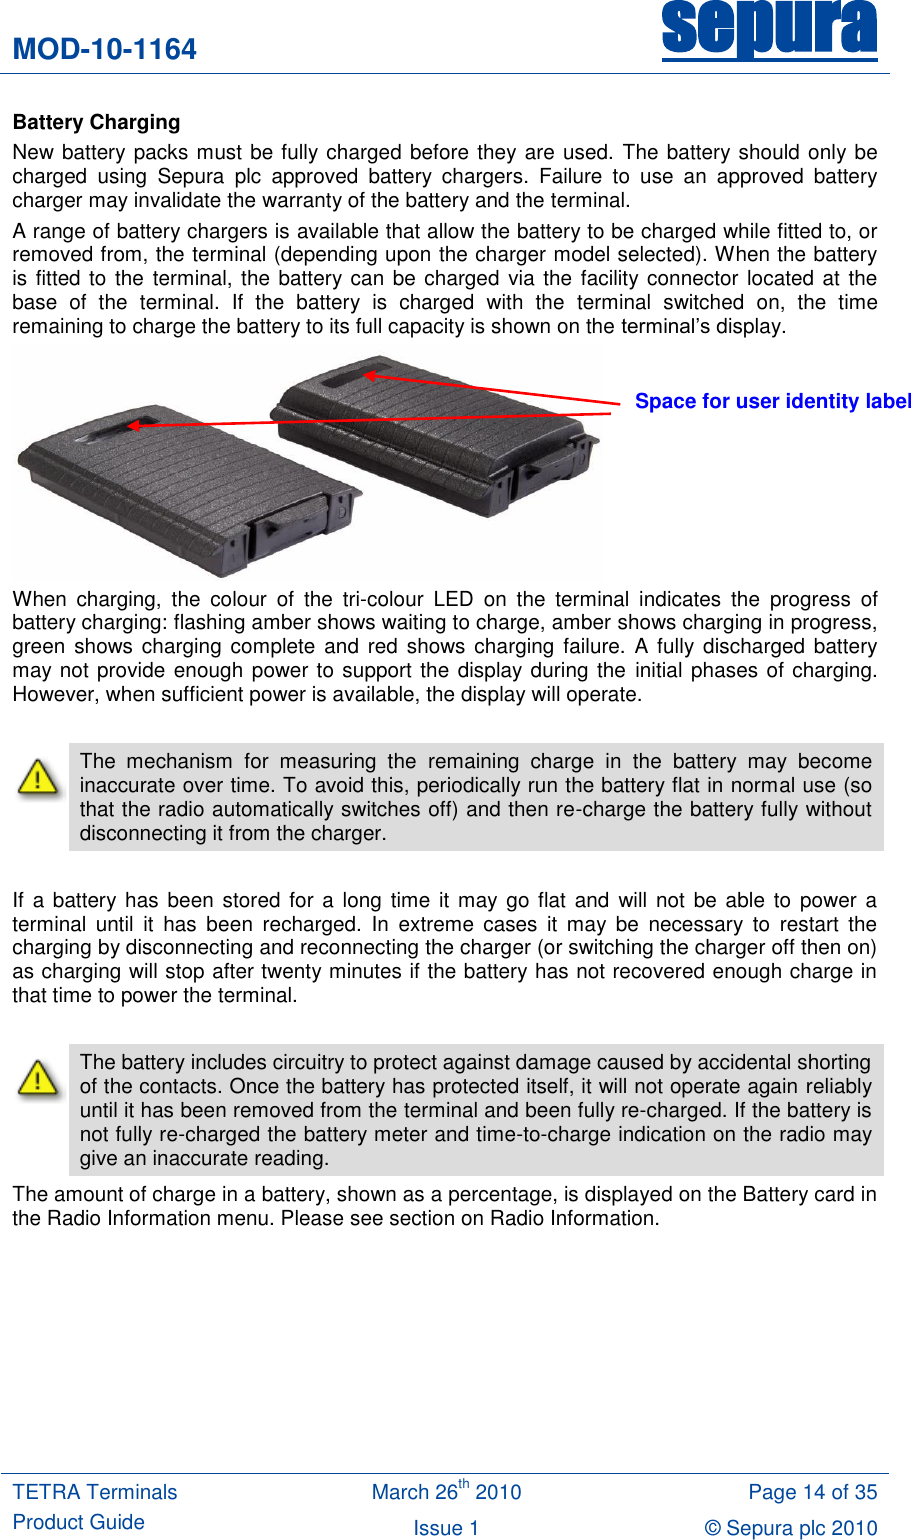 MOD-10-1164 sepura  TETRA Terminals Product Guide March 26th 2010 Page 14 of 35 Issue 1 © Sepura plc 2010   Battery Charging New battery packs must be fully charged before they are used. The battery should only be charged  using  Sepura  plc  approved  battery  chargers.  Failure  to  use  an  approved  battery charger may invalidate the warranty of the battery and the terminal. A range of battery chargers is available that allow the battery to be charged while fitted to, or removed from, the terminal (depending upon the charger model selected). When the battery is fitted to the terminal, the battery can be charged via the facility connector located at  the base  of  the  terminal.  If  the  battery  is  charged  with  the  terminal  switched  on,  the  time remaining to charge the battery to its full capacity is shown on the terminal‟s display.  When  charging,  the  colour  of  the  tri-colour  LED  on  the  terminal  indicates  the  progress  of battery charging: flashing amber shows waiting to charge, amber shows charging in progress, green shows  charging complete and red  shows charging failure.  A fully  discharged battery may not provide enough power to support the display during the initial phases of charging. However, when sufficient power is available, the display will operate.   The  mechanism  for  measuring  the  remaining  charge  in  the  battery  may  become inaccurate over time. To avoid this, periodically run the battery flat in normal use (so that the radio automatically switches off) and then re-charge the battery fully without disconnecting it from the charger.      If a battery has been  stored for a long time it  may go flat  and  will not be  able to  power a terminal  until  it  has  been  recharged.  In  extreme  cases  it  may  be  necessary  to  restart  the charging by disconnecting and reconnecting the charger (or switching the charger off then on) as charging will stop after twenty minutes if the battery has not recovered enough charge in that time to power the terminal.   The battery includes circuitry to protect against damage caused by accidental shorting of the contacts. Once the battery has protected itself, it will not operate again reliably until it has been removed from the terminal and been fully re-charged. If the battery is not fully re-charged the battery meter and time-to-charge indication on the radio may give an inaccurate reading. The amount of charge in a battery, shown as a percentage, is displayed on the Battery card in the Radio Information menu. Please see section on Radio Information.  Space for user identity label 